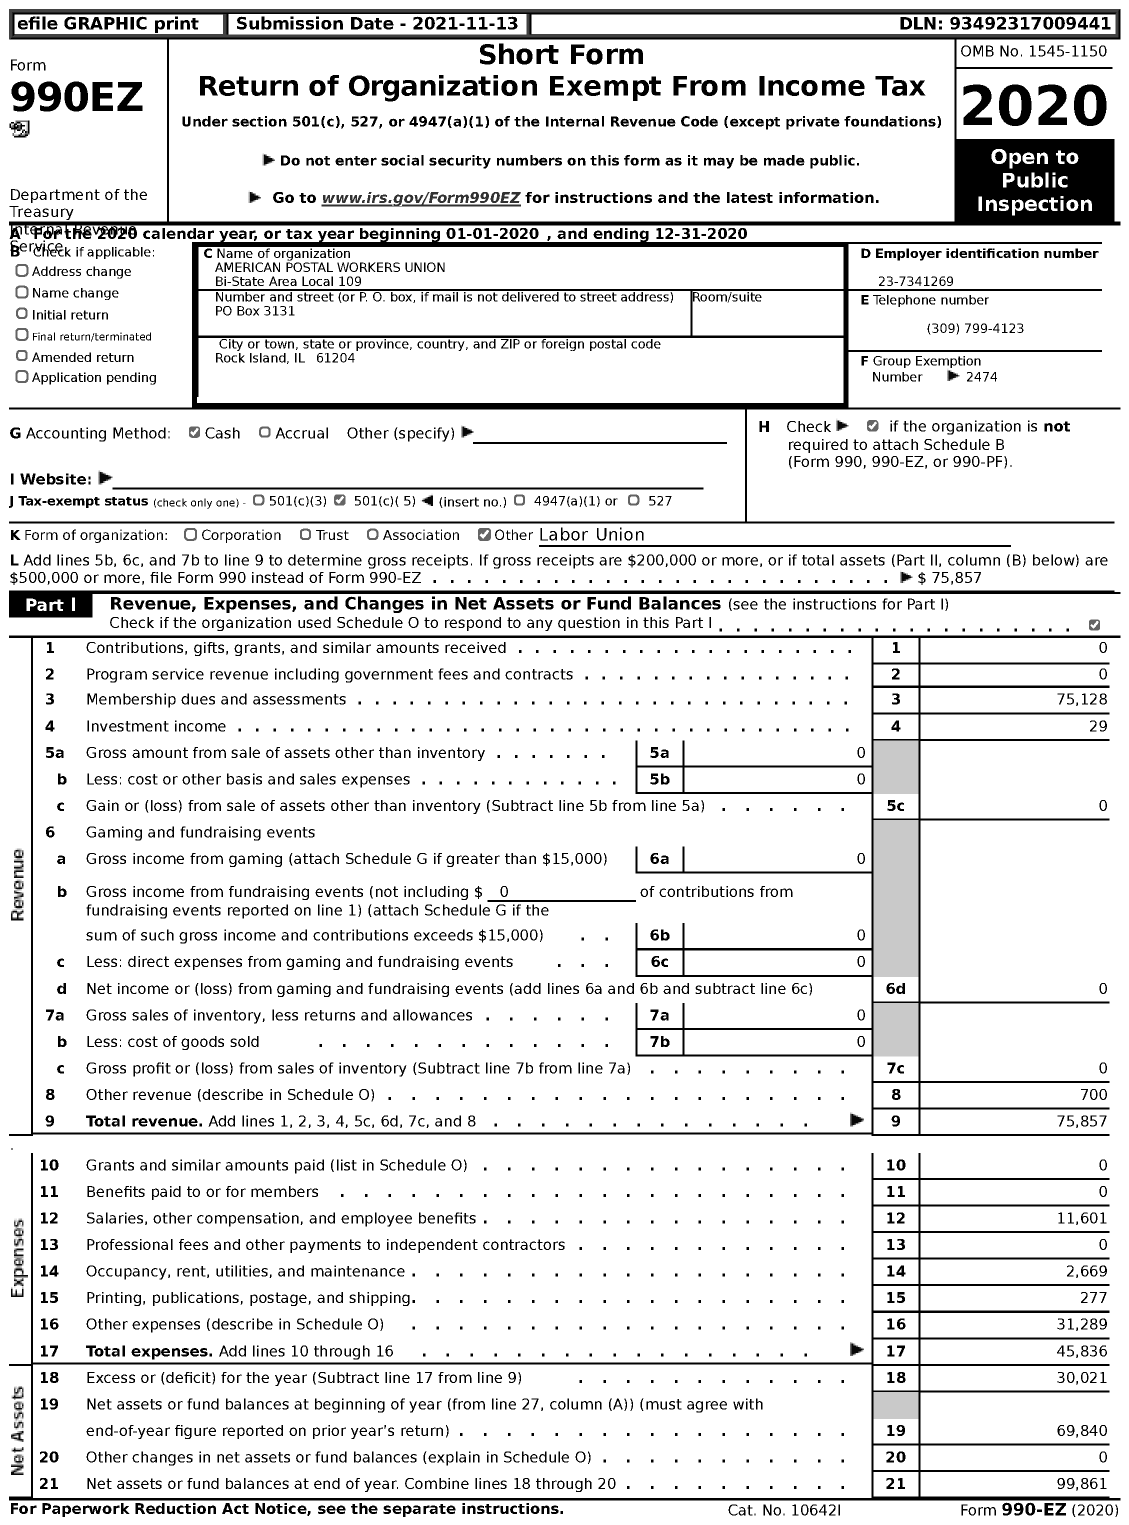 Image of first page of 2020 Form 990EZ for American Postal Workers Union 109 (109 Bi-State Area Local)